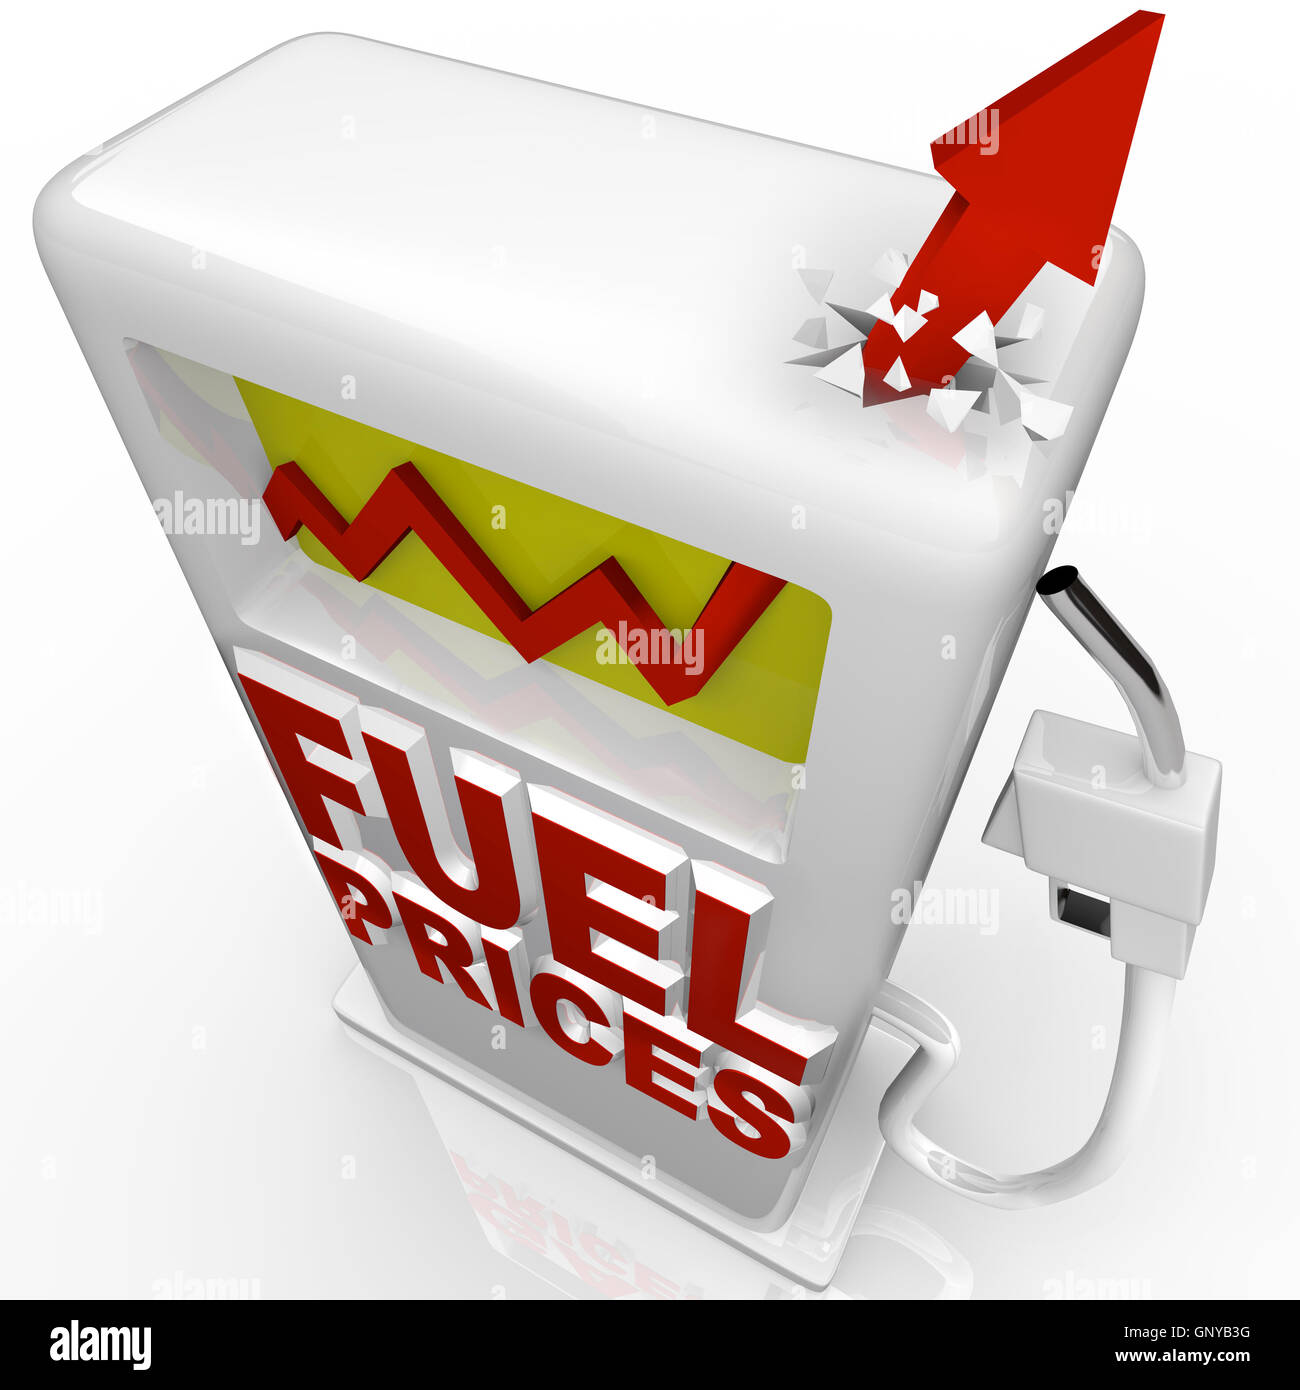 Gas Prices - Arrow Rising at Gasoline Pump Stock Photo